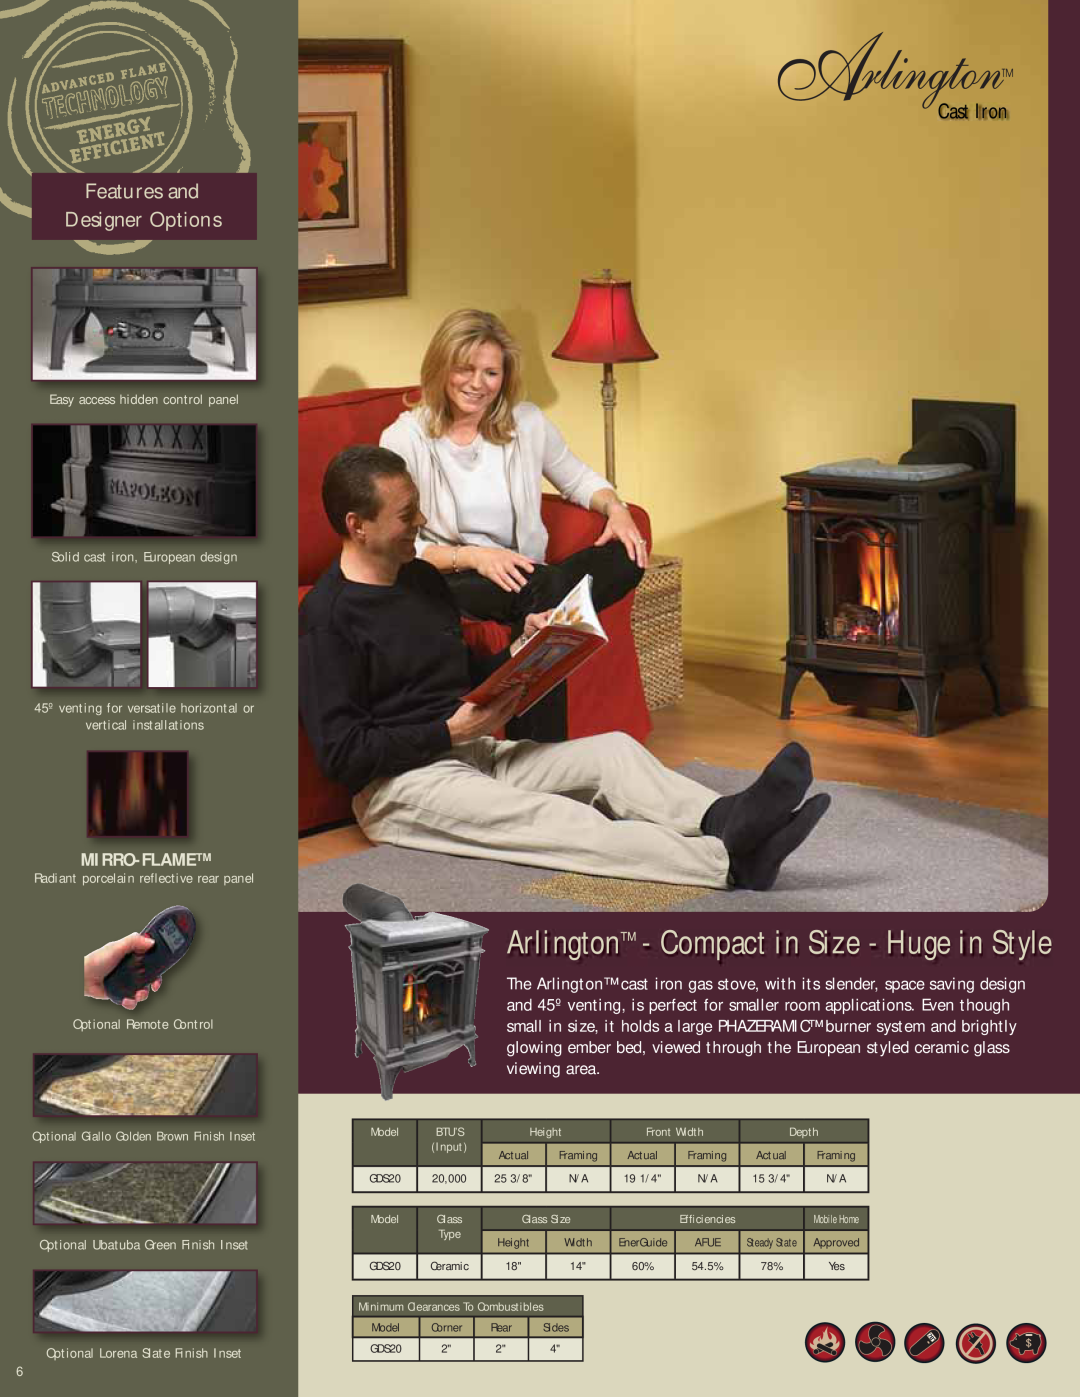 Napoleon Fireplaces Gas Burning Stoves manual Cast Iron, Features and Designer Options, Mirro-Flame, vertical installations 